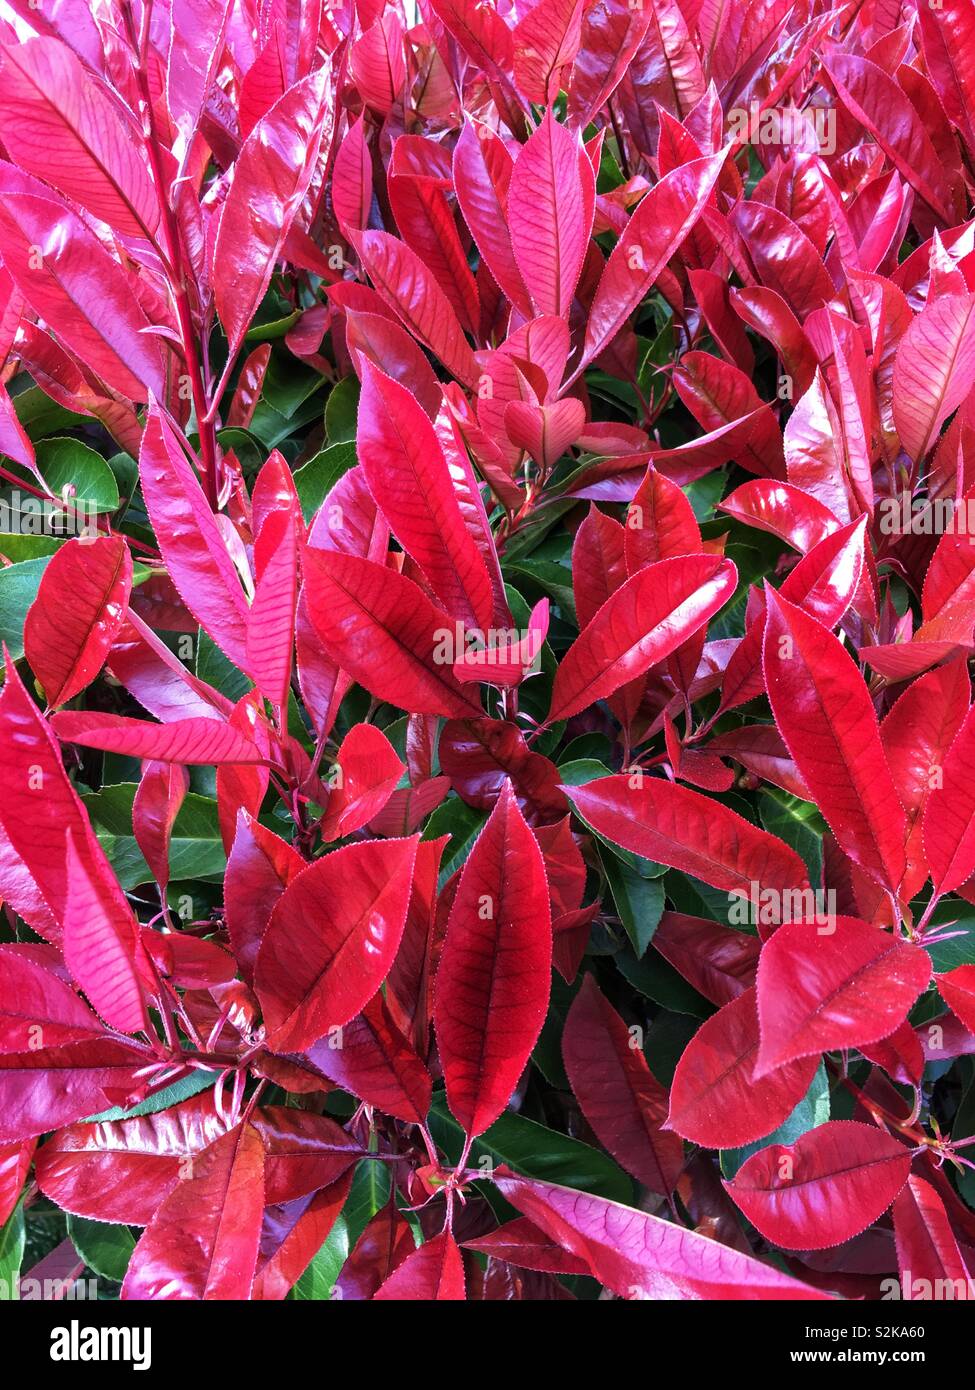 New red leaves of a green shrub Stock Photo